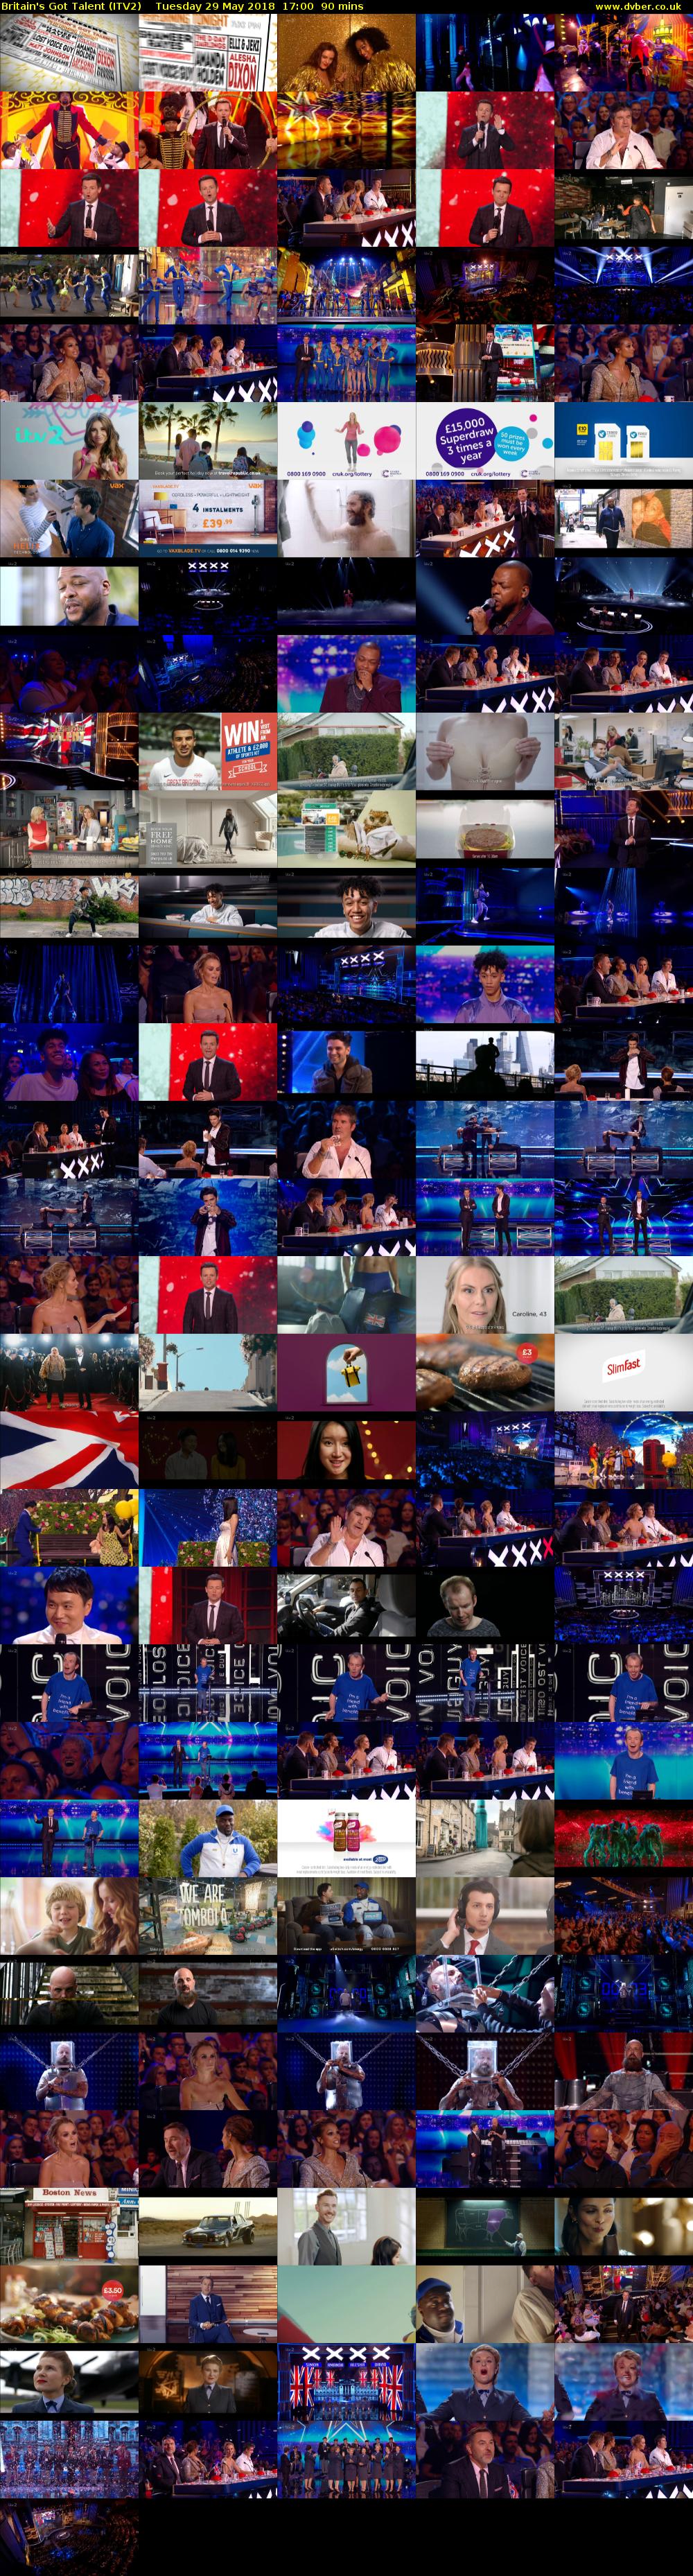 Britain's Got Talent (ITV2) Tuesday 29 May 2018 17:00 - 18:30